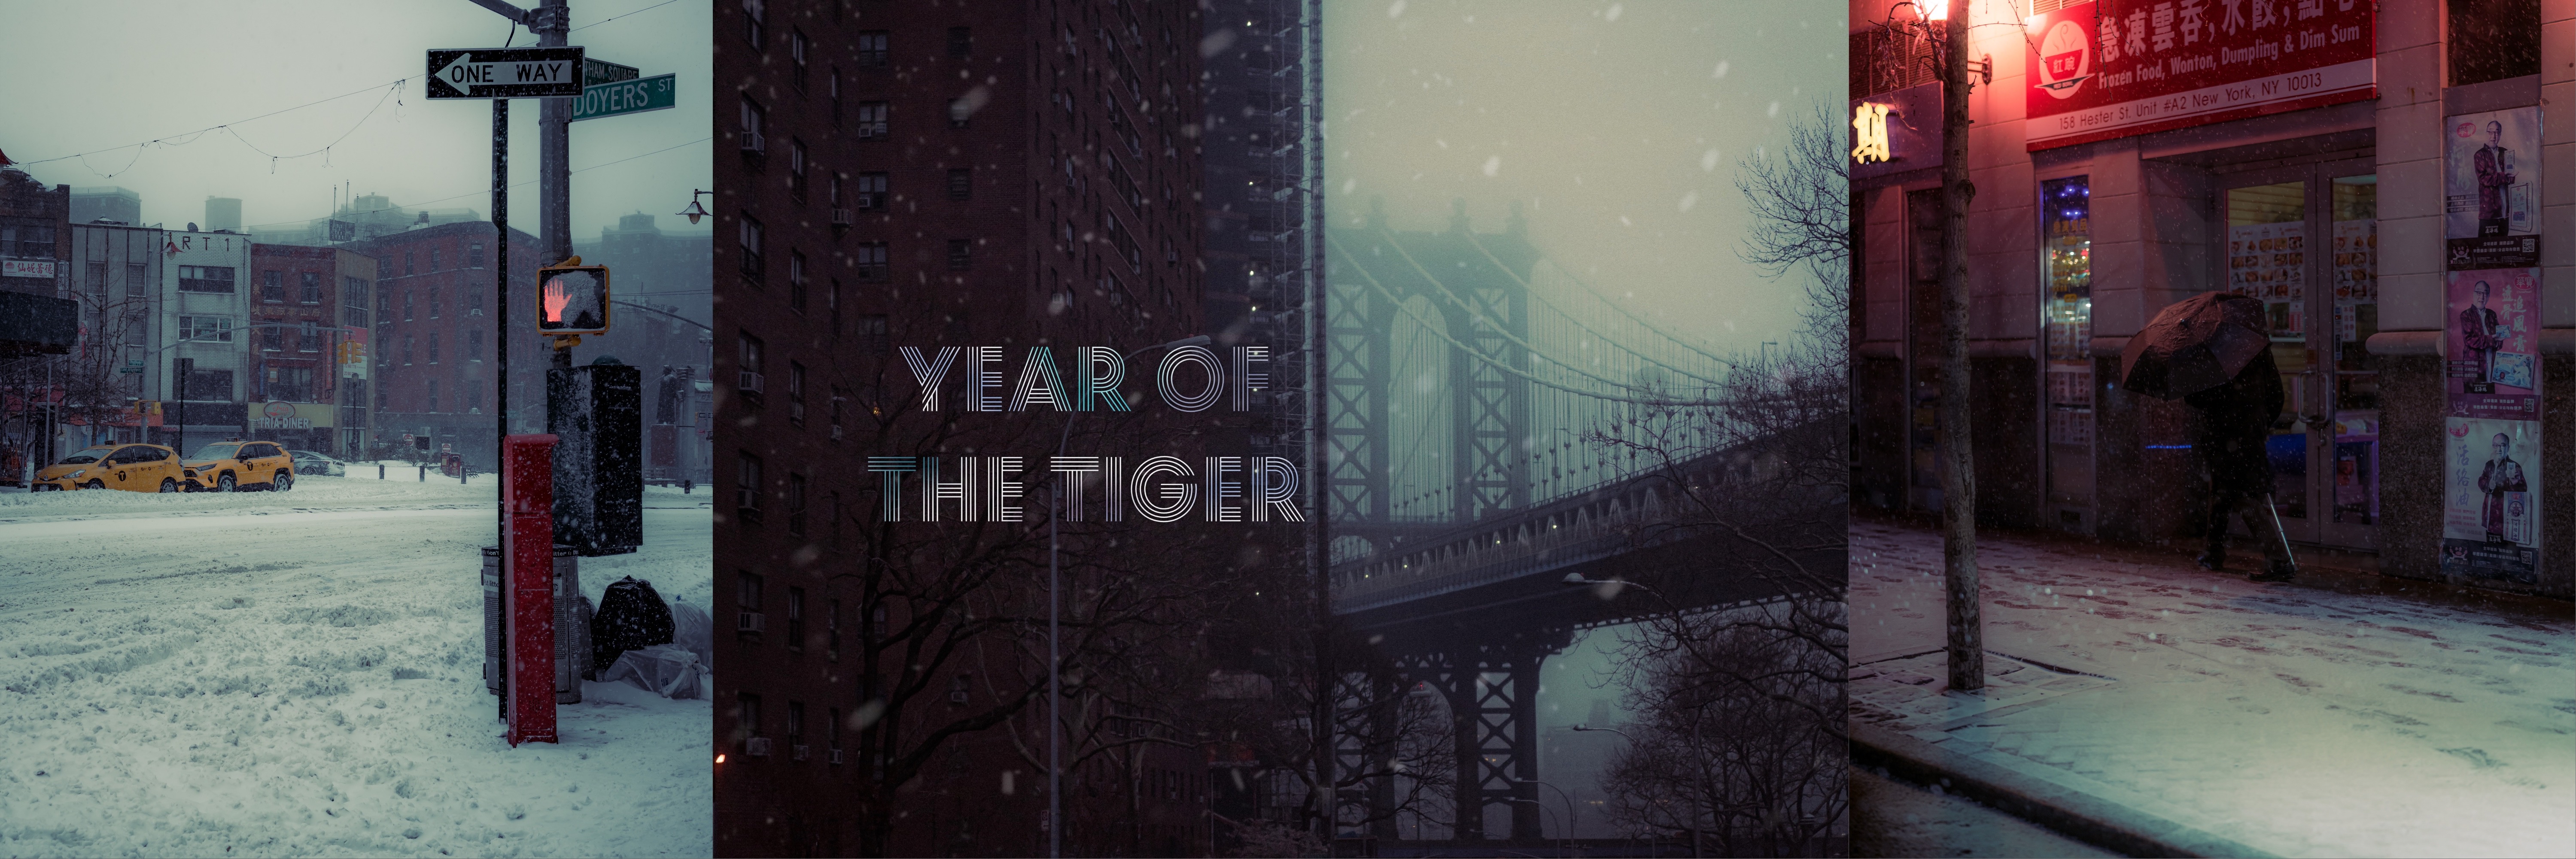 'Year of the Tiger'